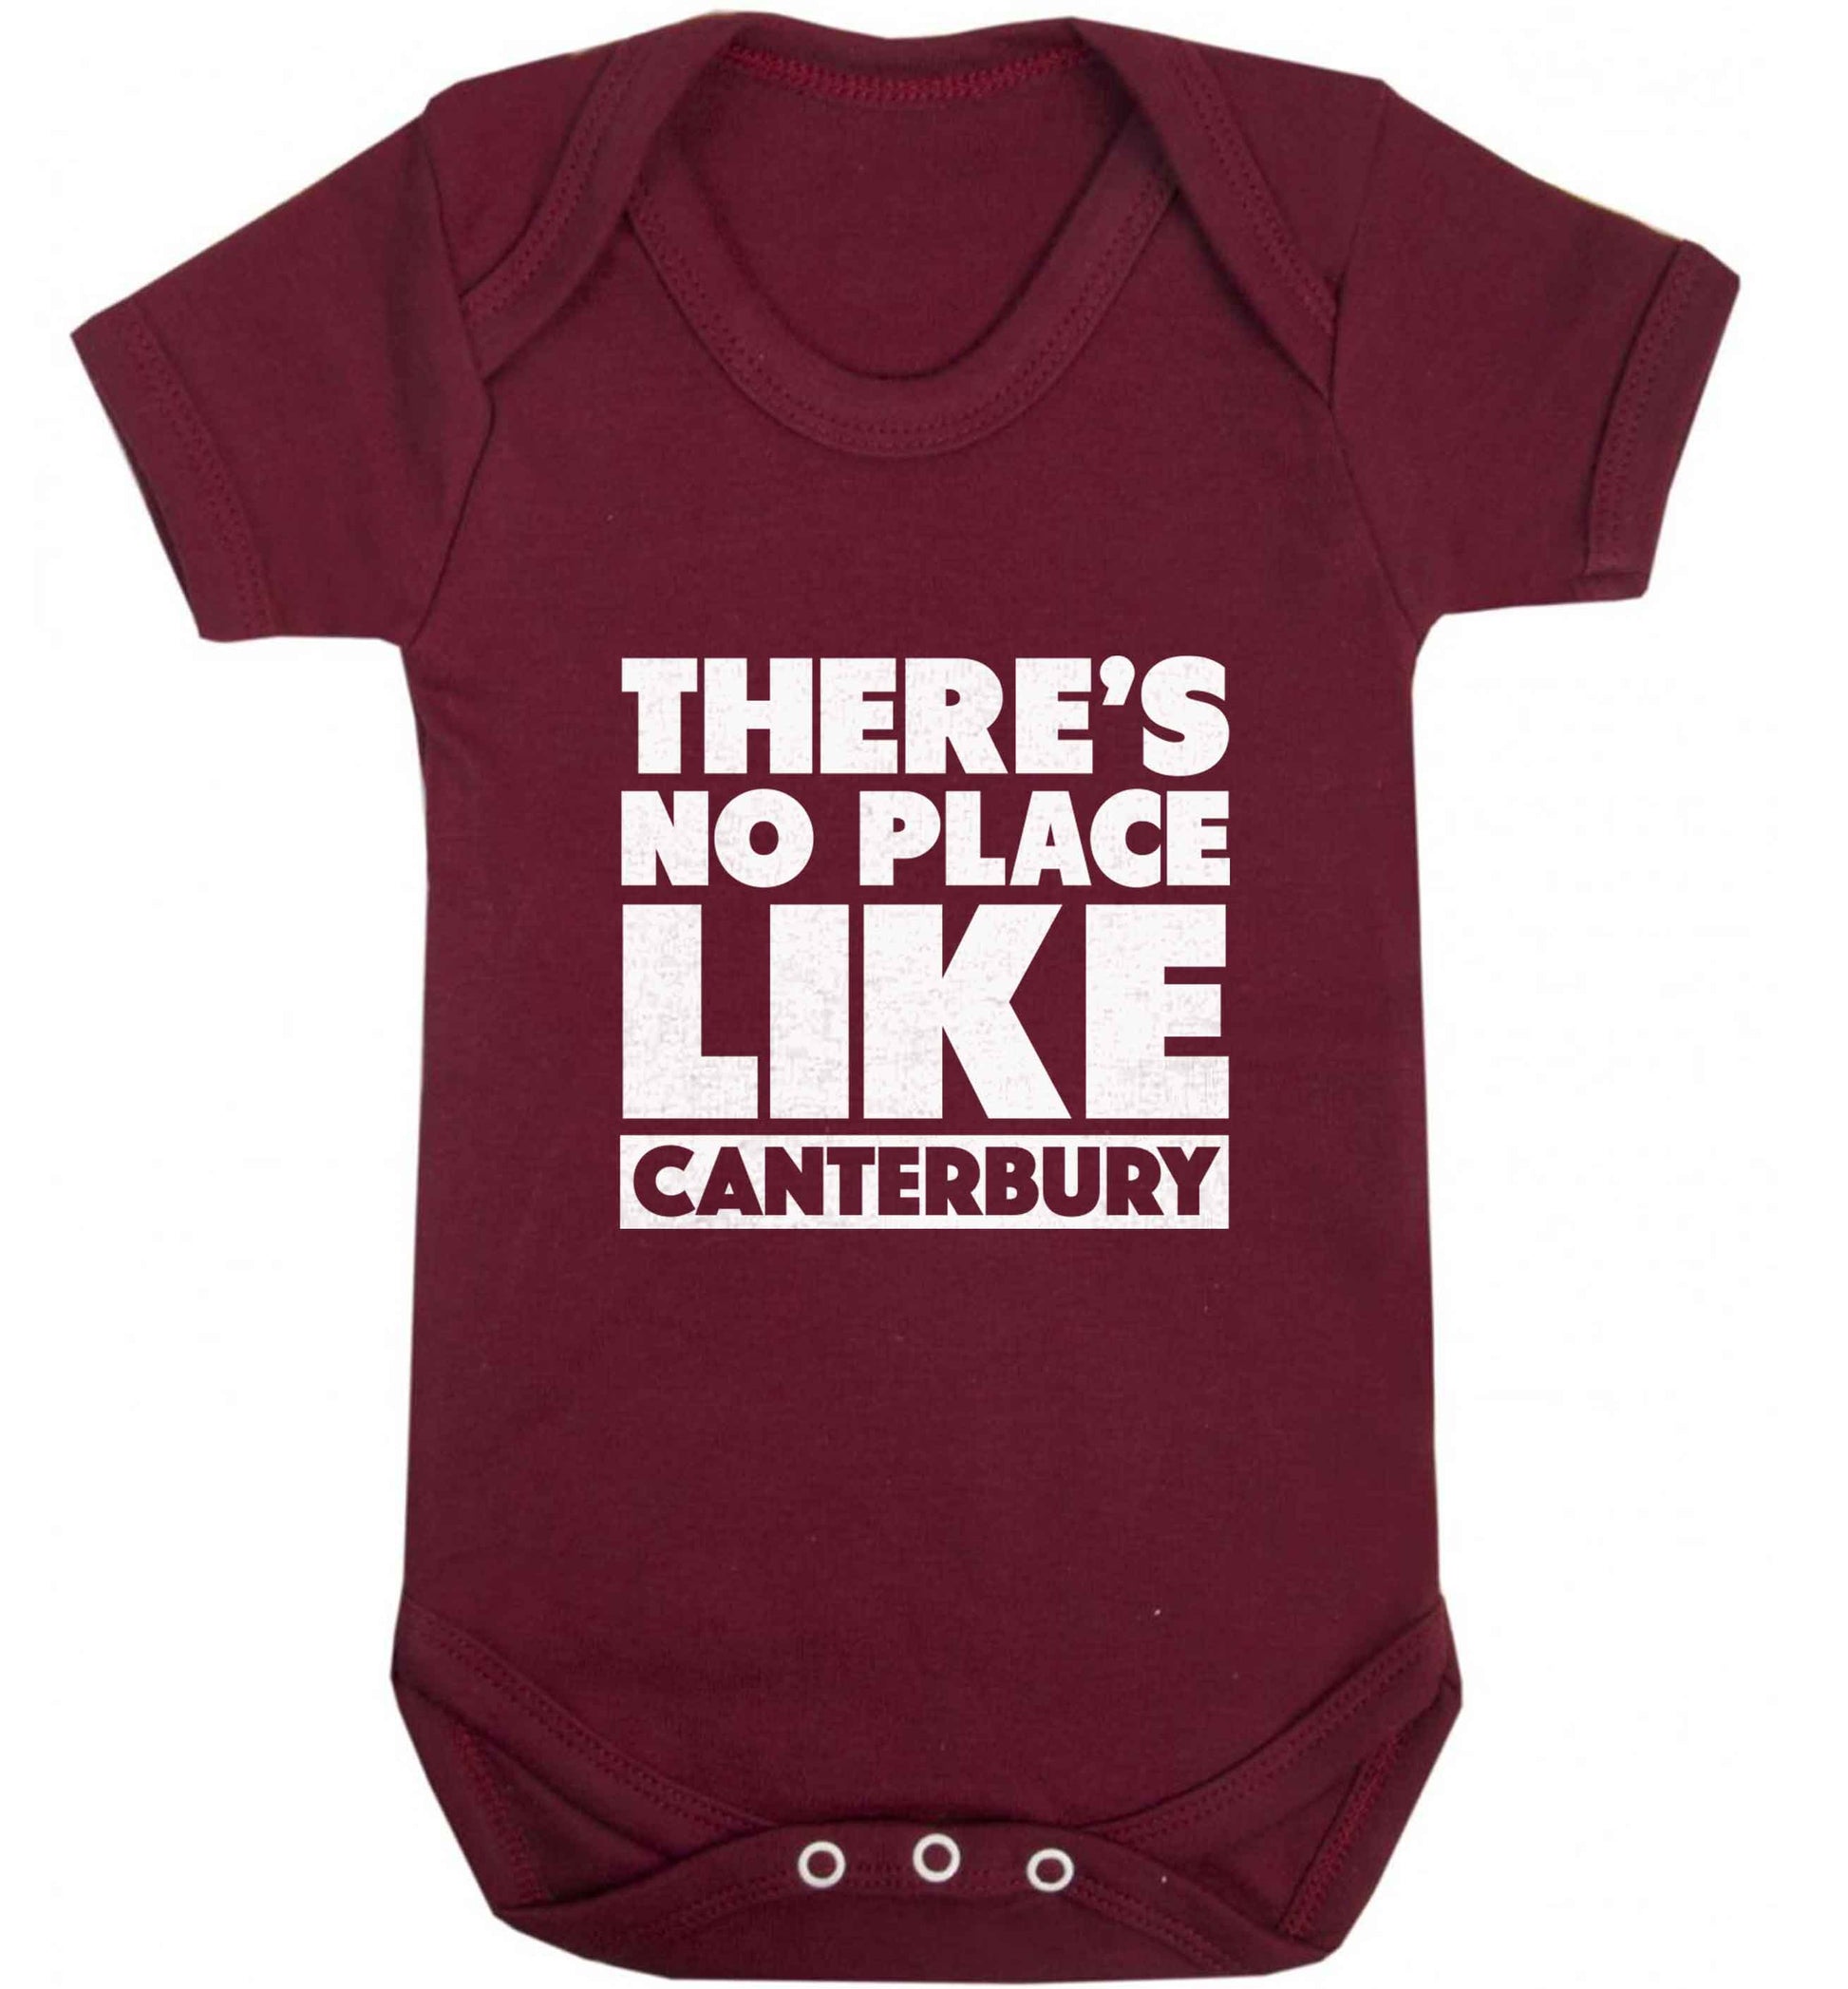 There's no place like Canterbury baby vest maroon 18-24 months